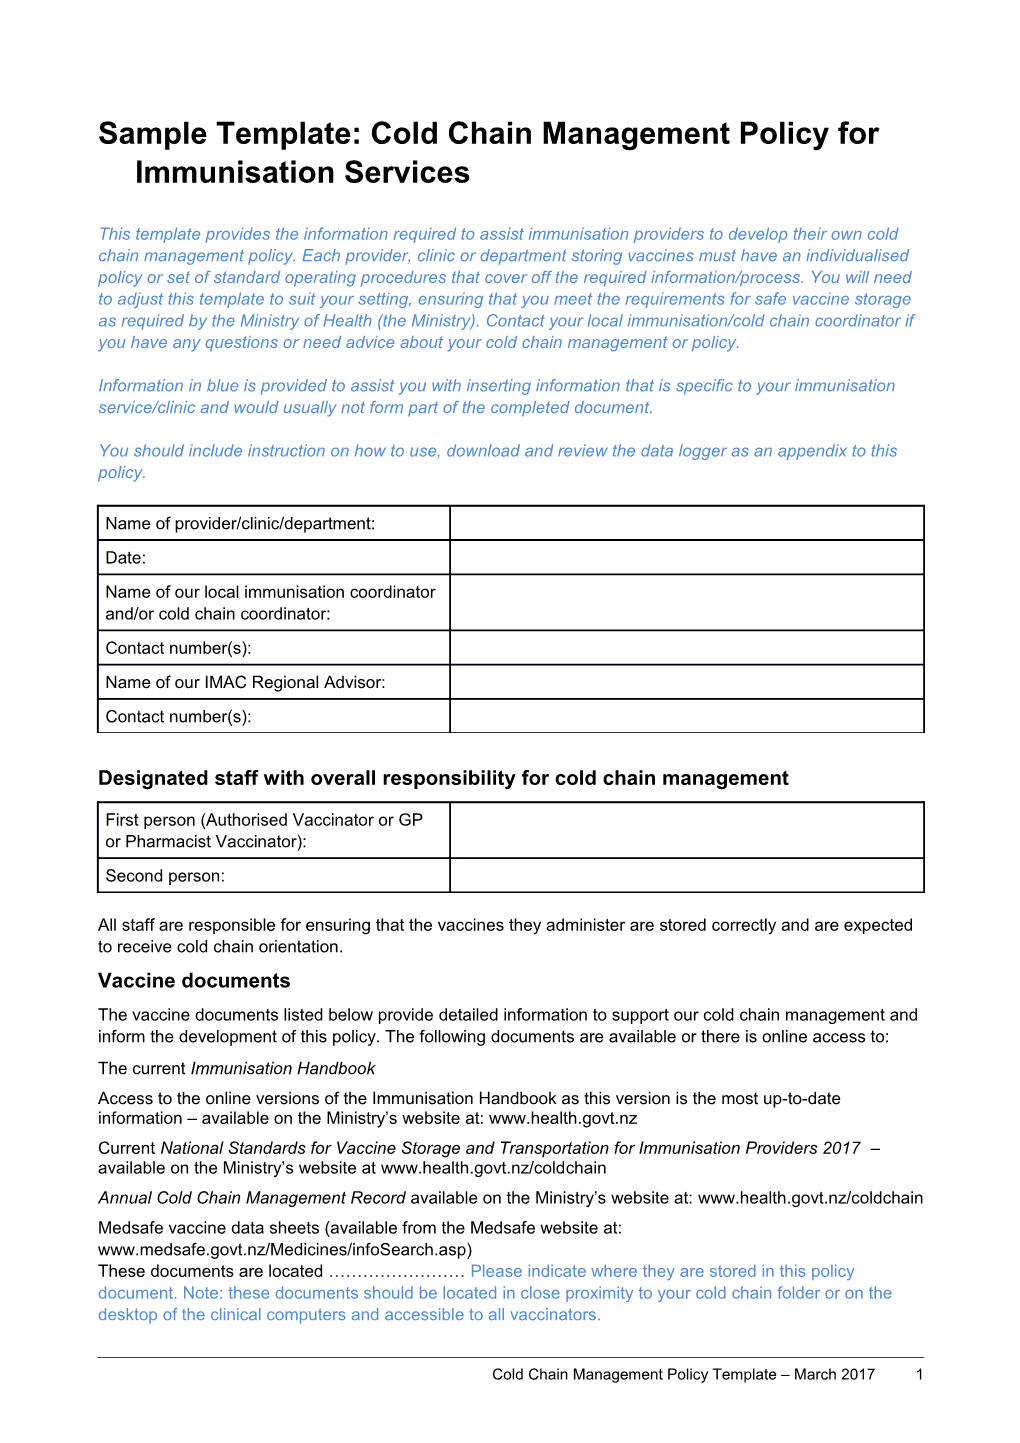 Sample Template: Cold Chain Management Policy for Immunisation Services